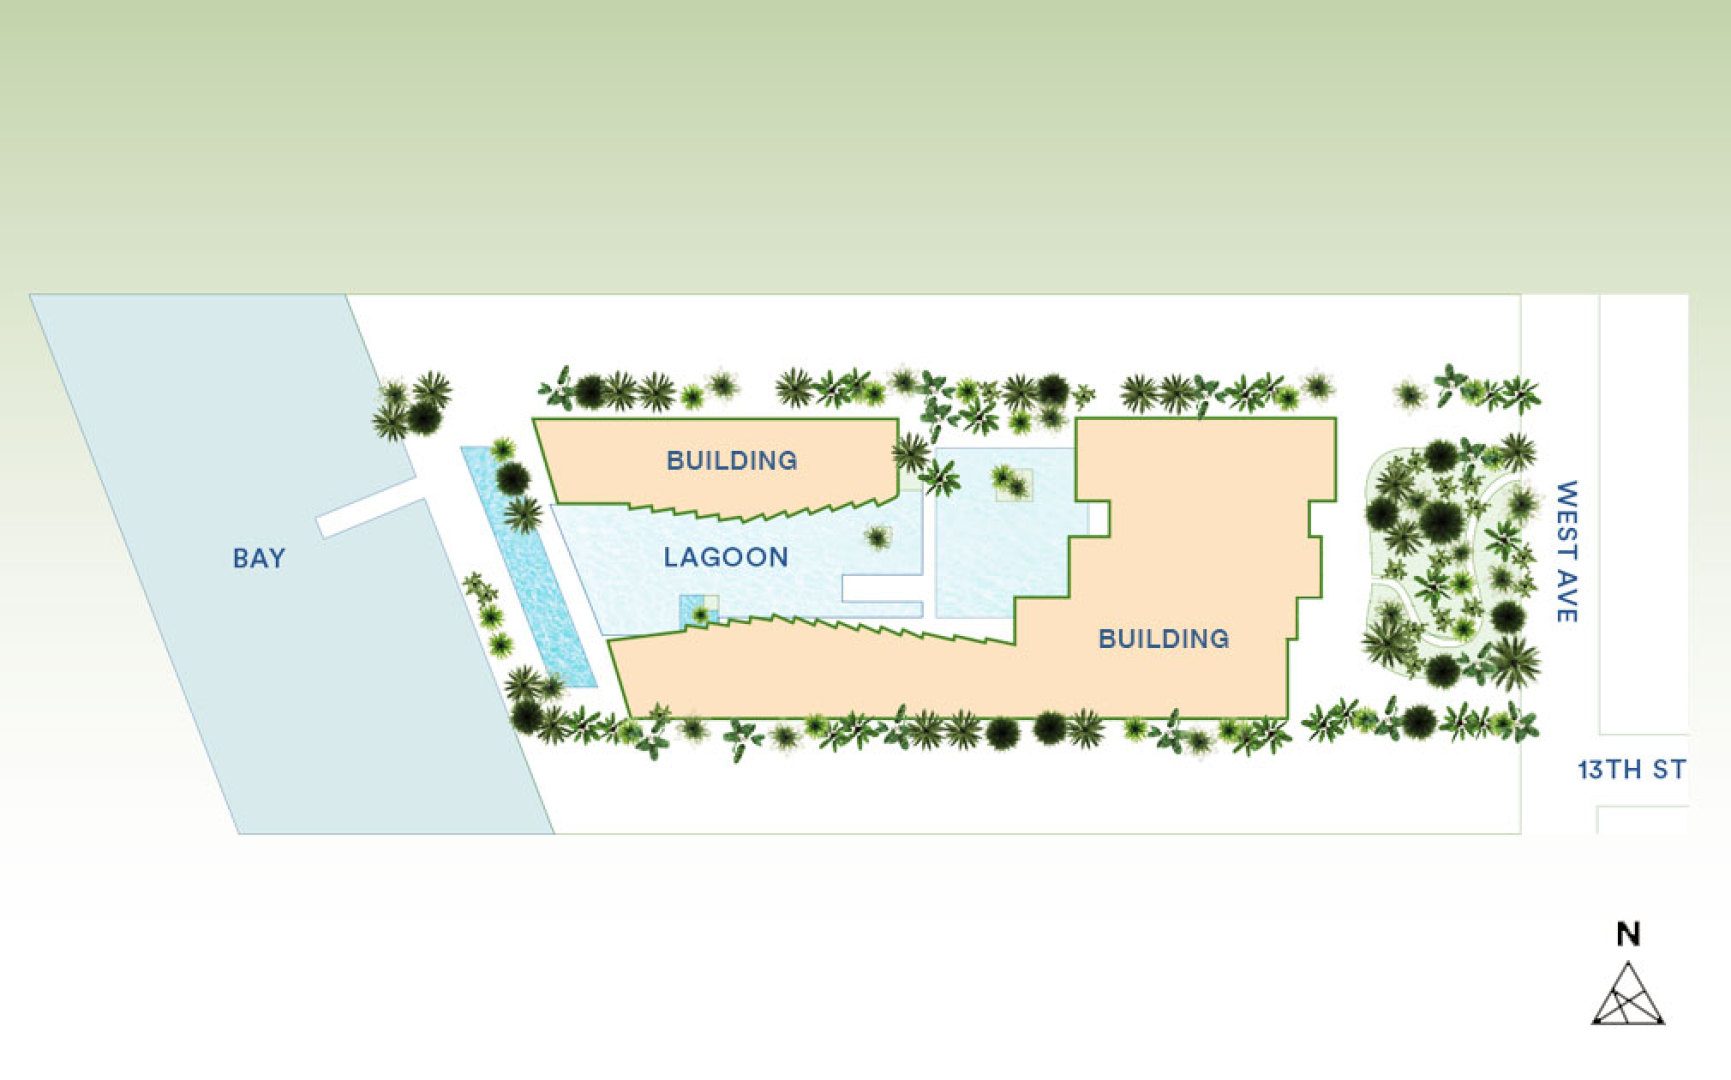 Siteplan for Monad Terrace, Luxury Waterfront Condos in South Beach, Miami, Florida 33139.